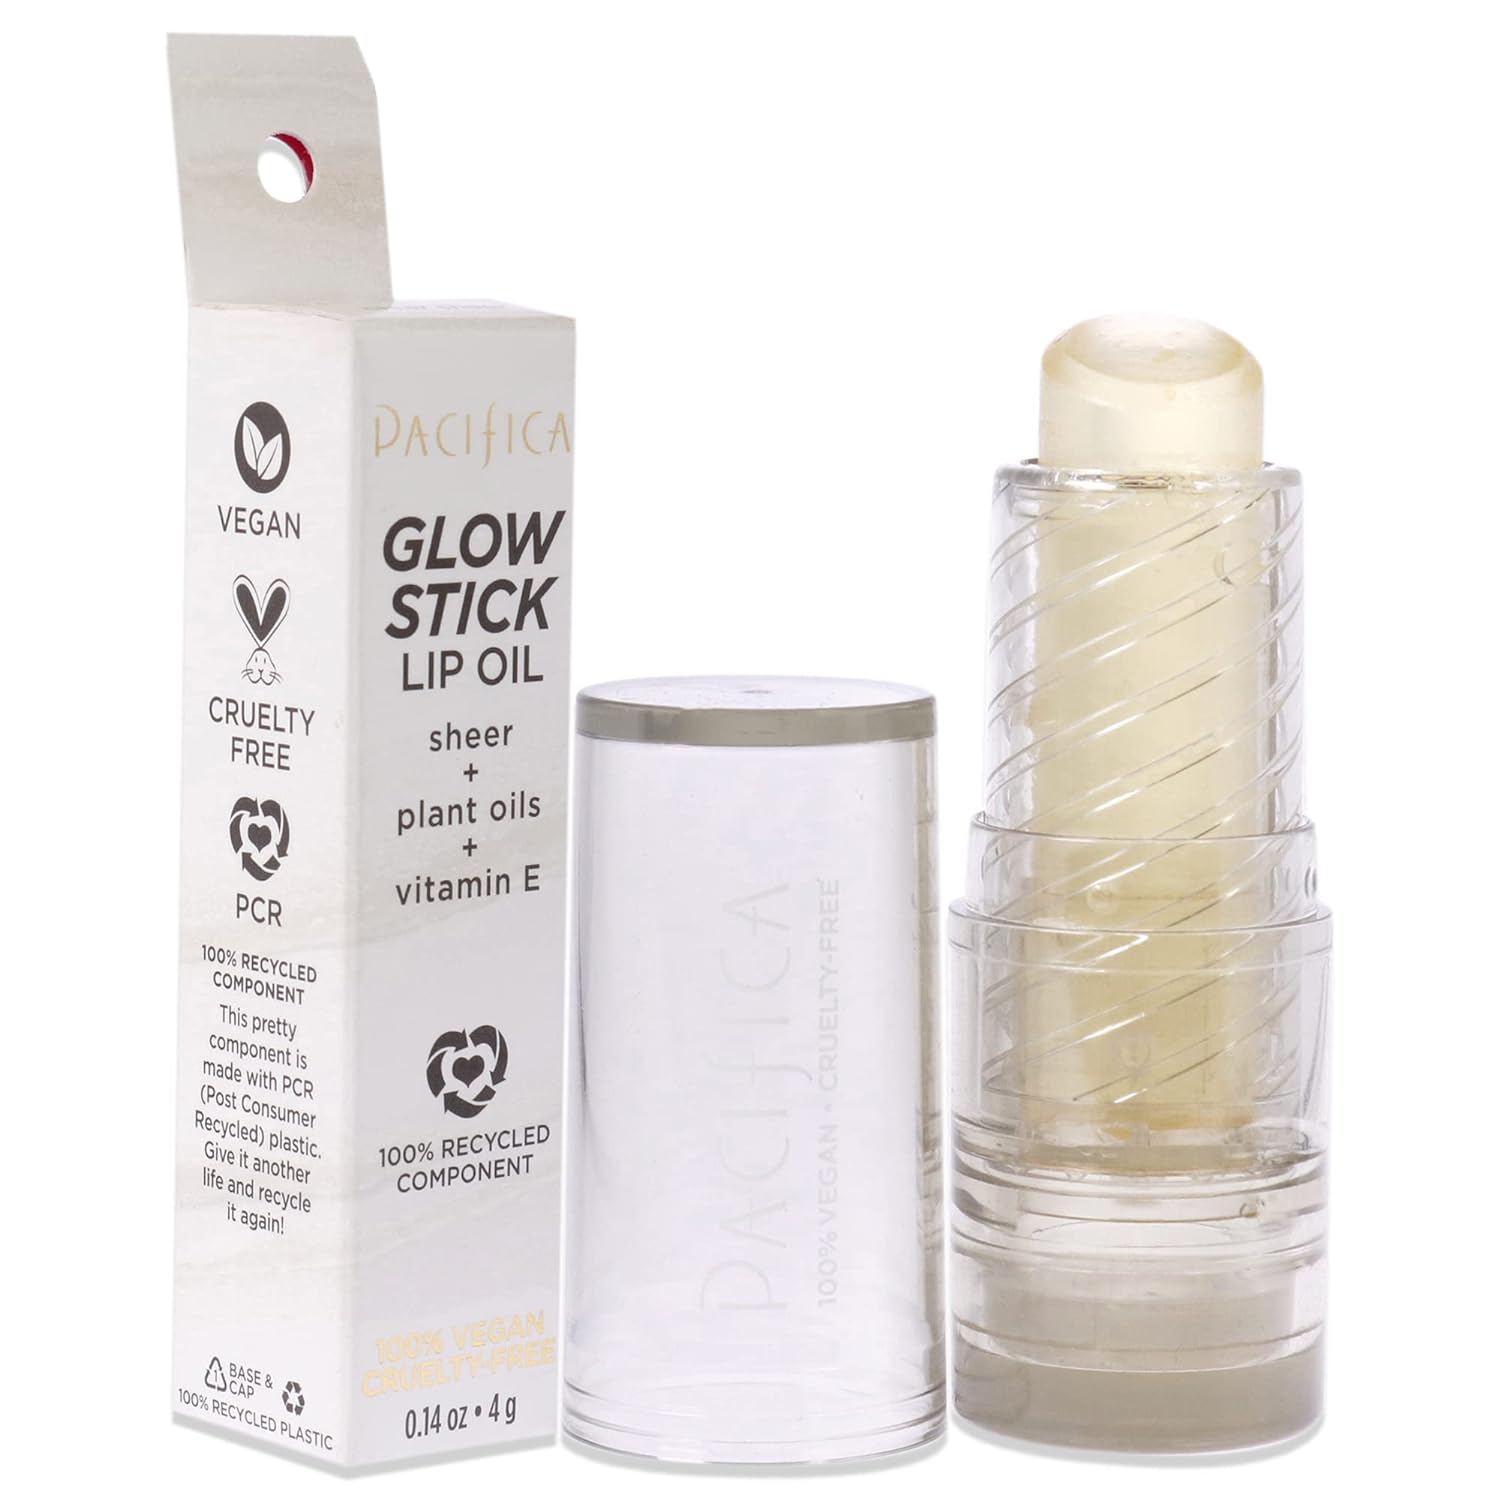 Pacifica Glow Stick Lip Oil - Clear Sheer Women 0.14 oz : Beauty & Personal Care